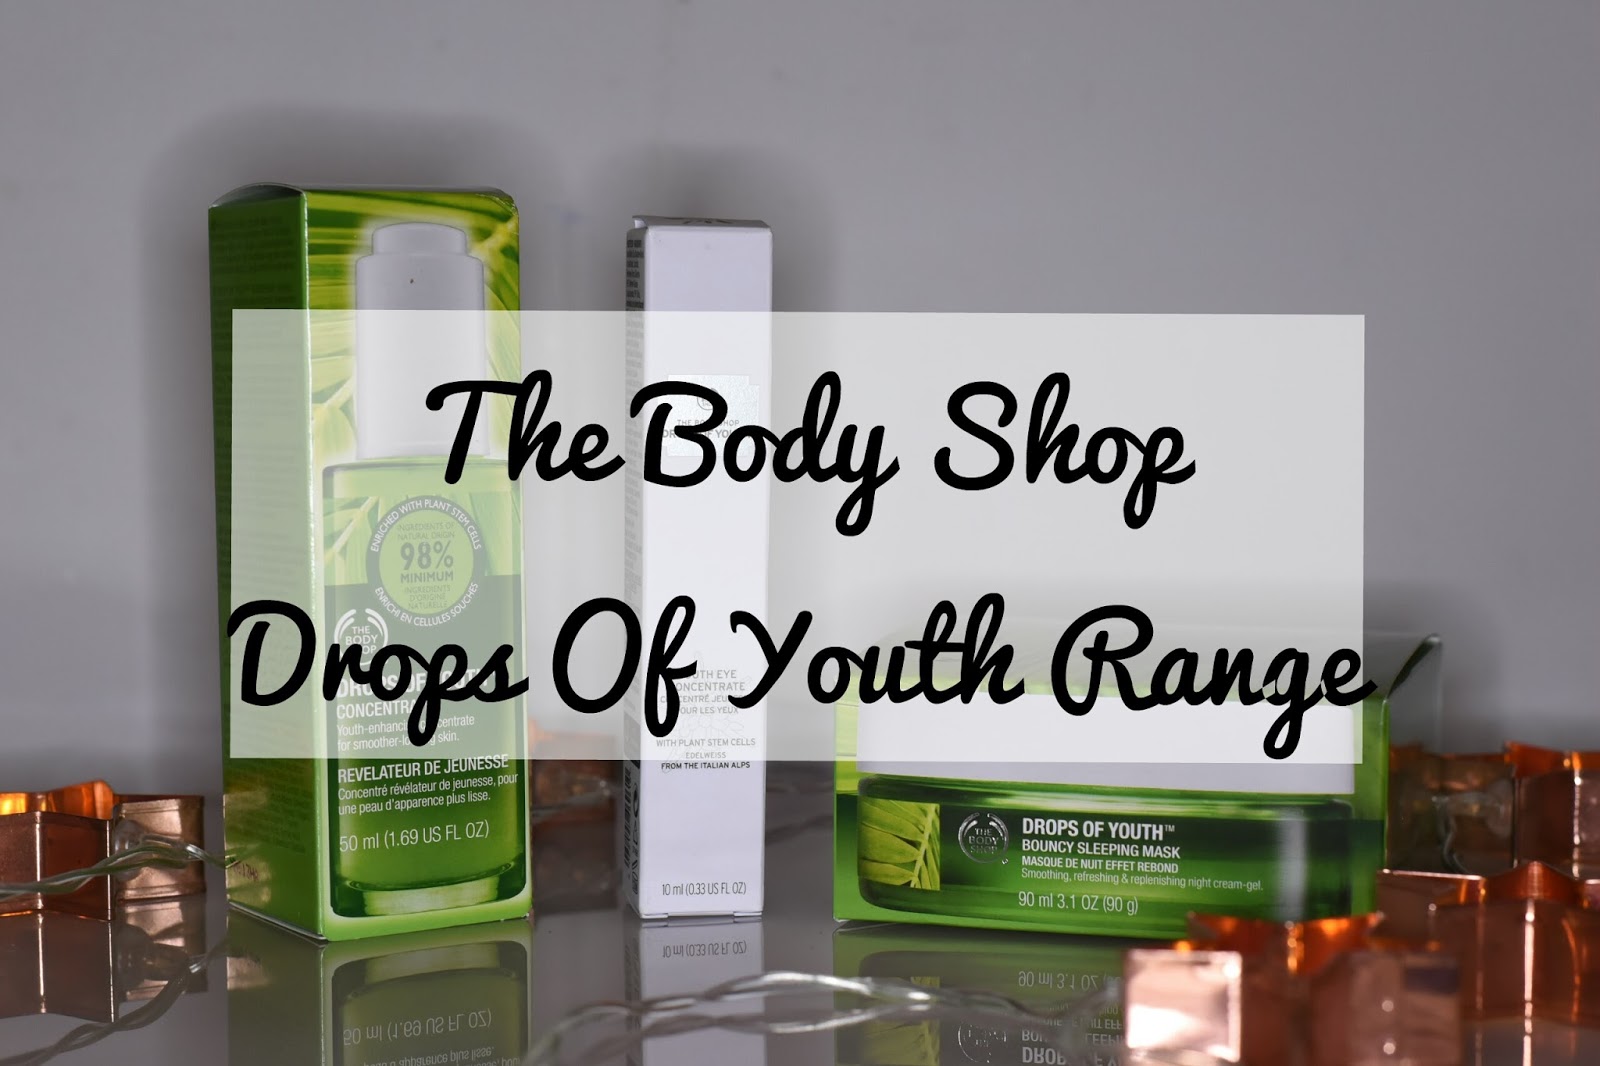 The Body Shop Drops of Youth Range